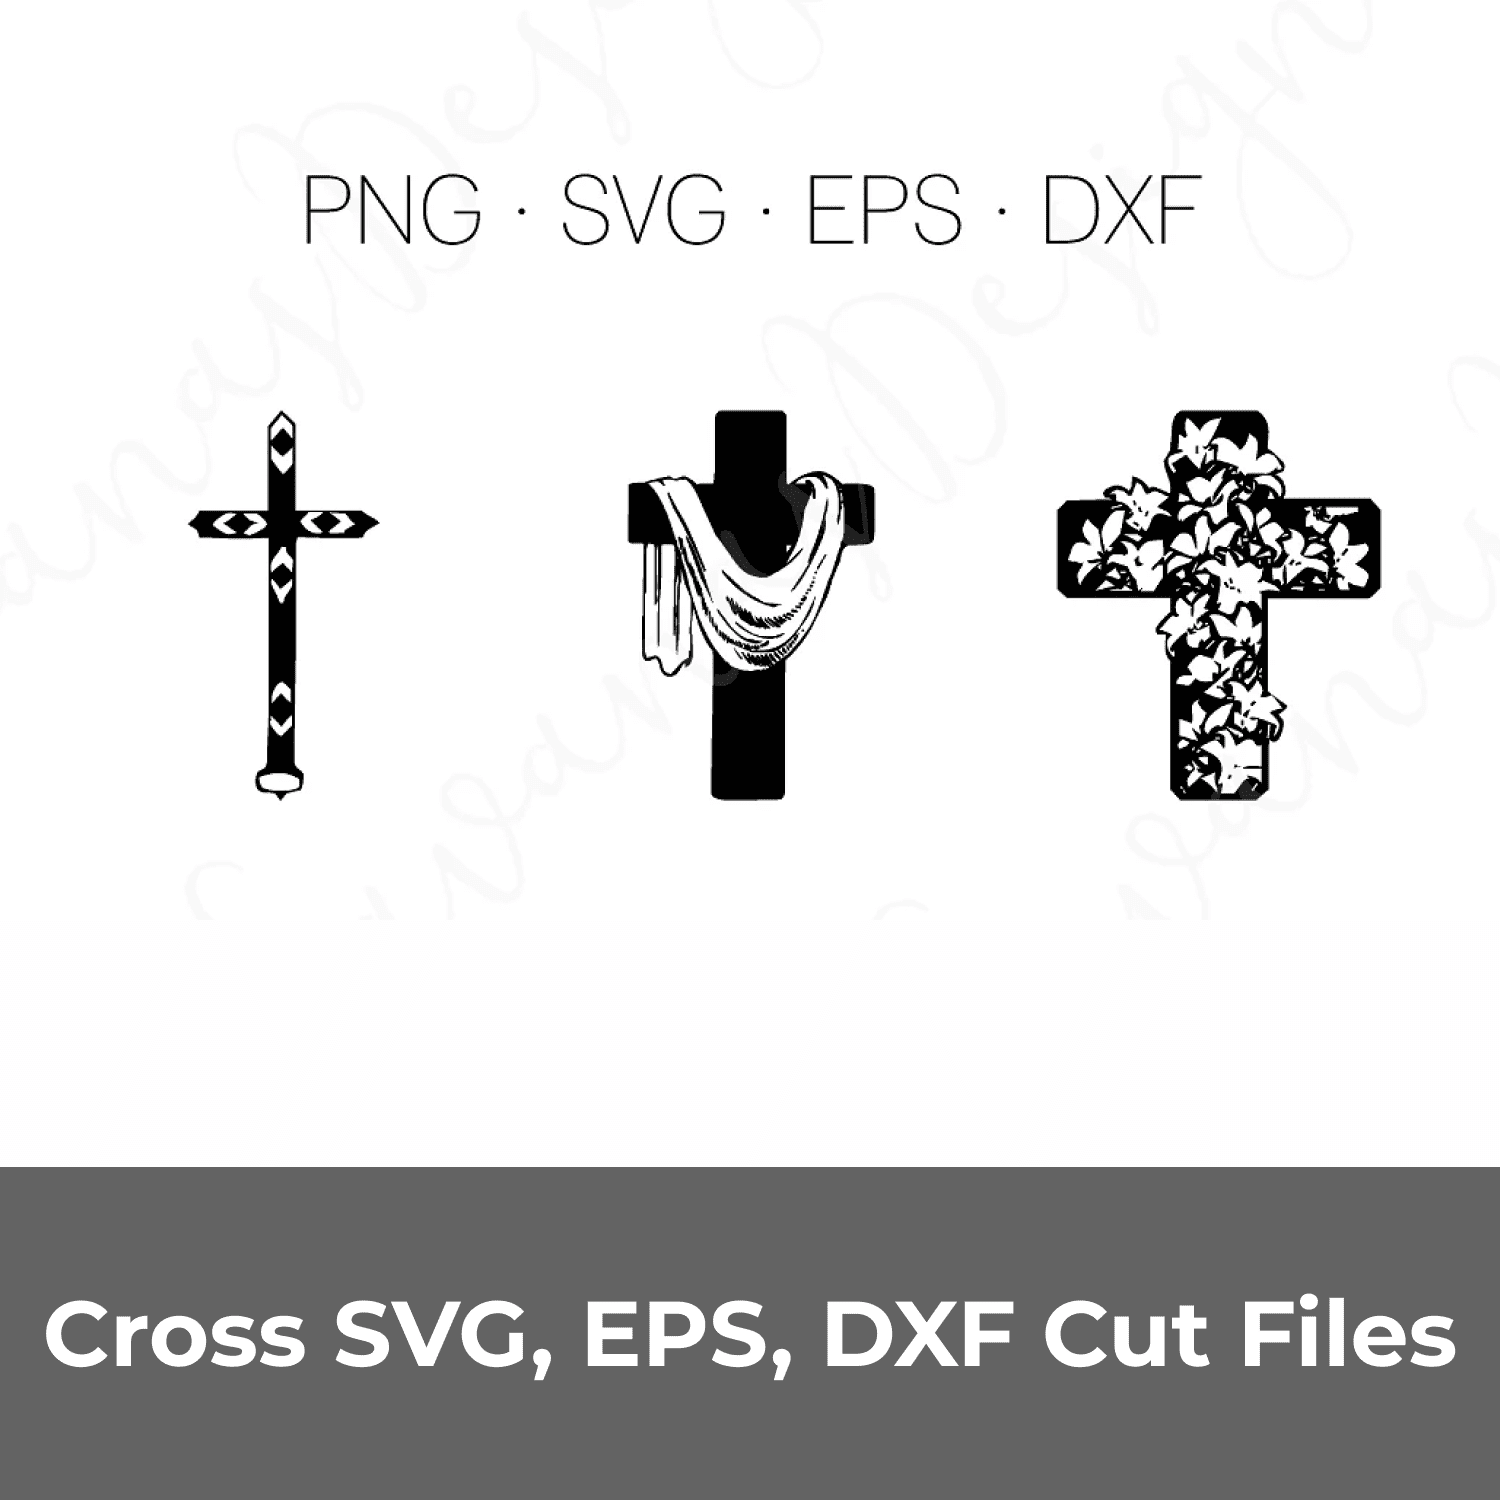 Cross SVG, EPS, DXF Cut Files cover.